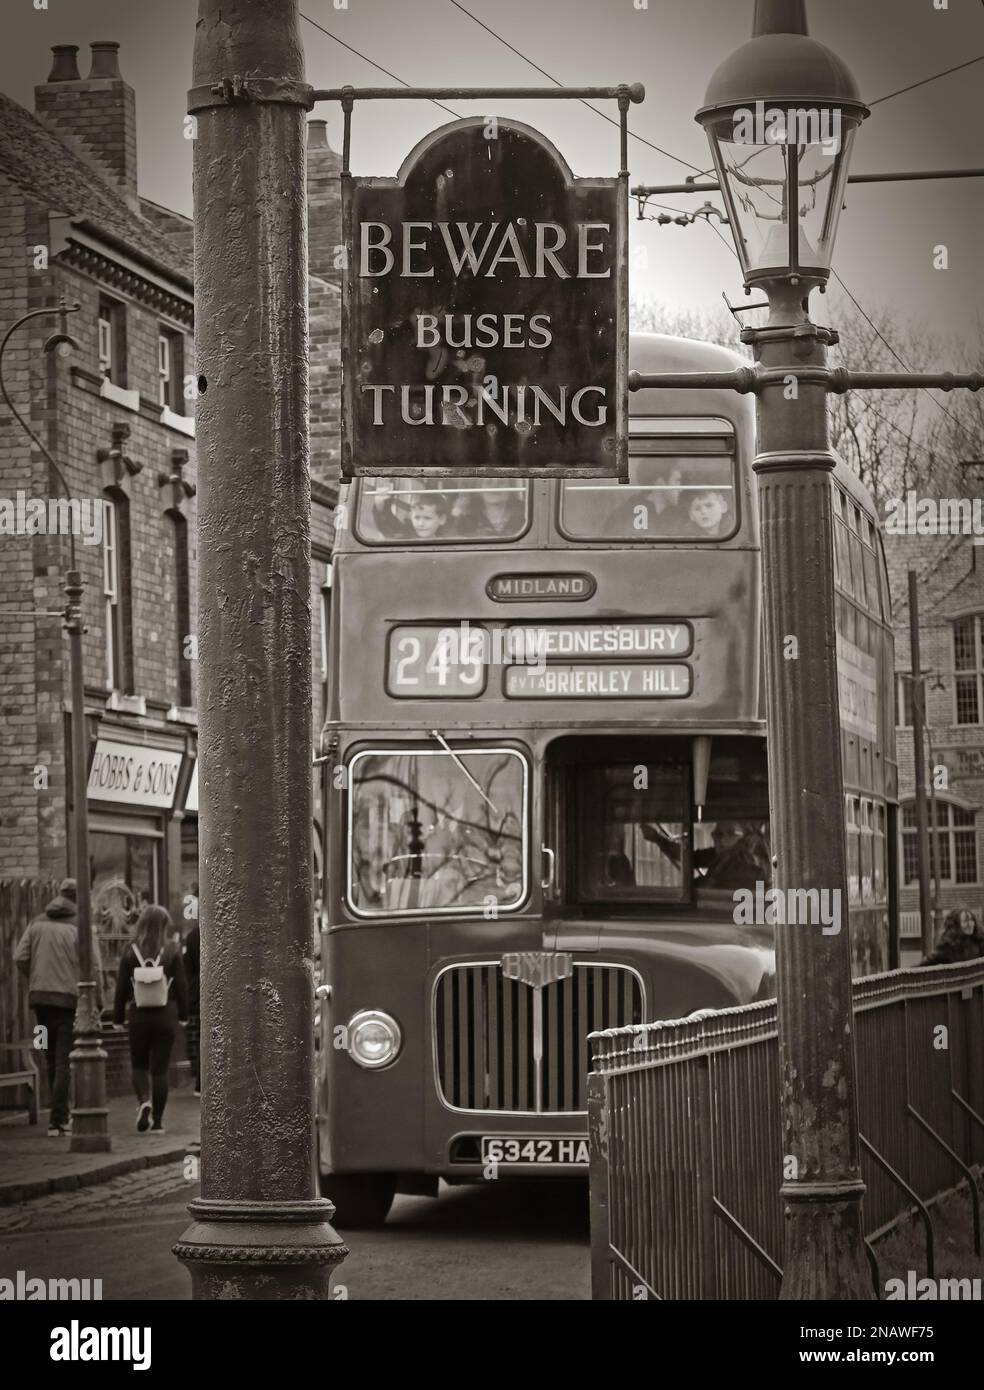 Beware buses turning sign, in street, - 245 Midland Red bus approaches to Wednesbury via Brierly Hill, 6342HA Stock Photo